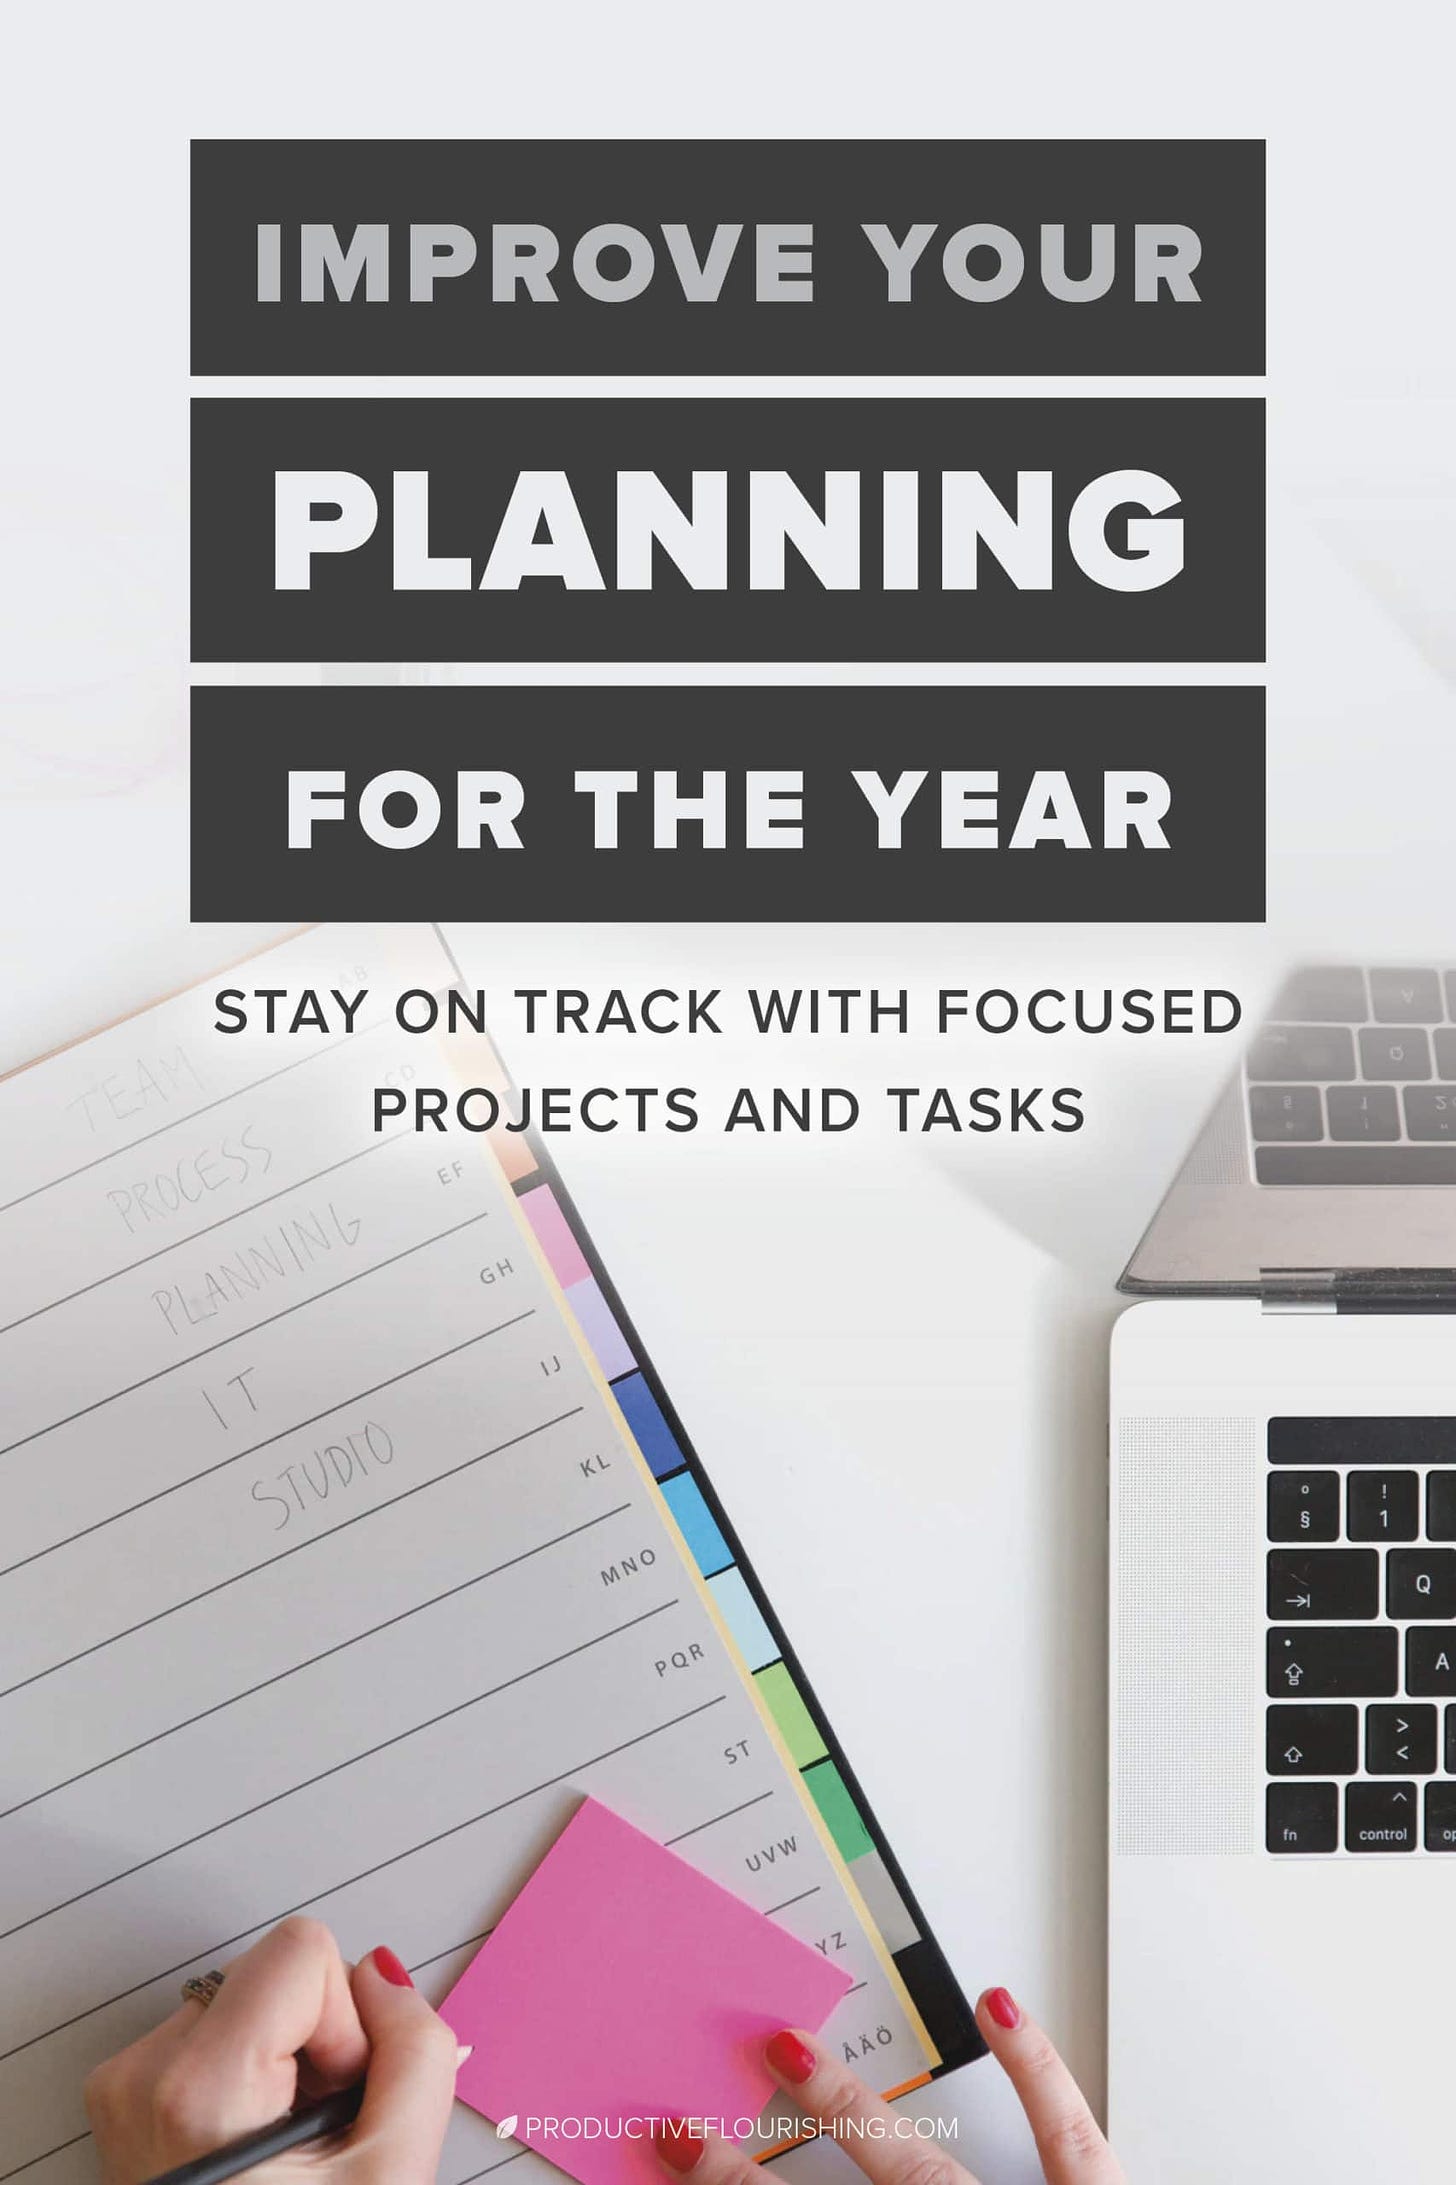 How to plan and accomplish complicated goals with this sem-annual planning technique. Learn how to improve your planning process so you can be successful in reaching your annual goals. A guest post from Lisa Robbin Young and her take on the 